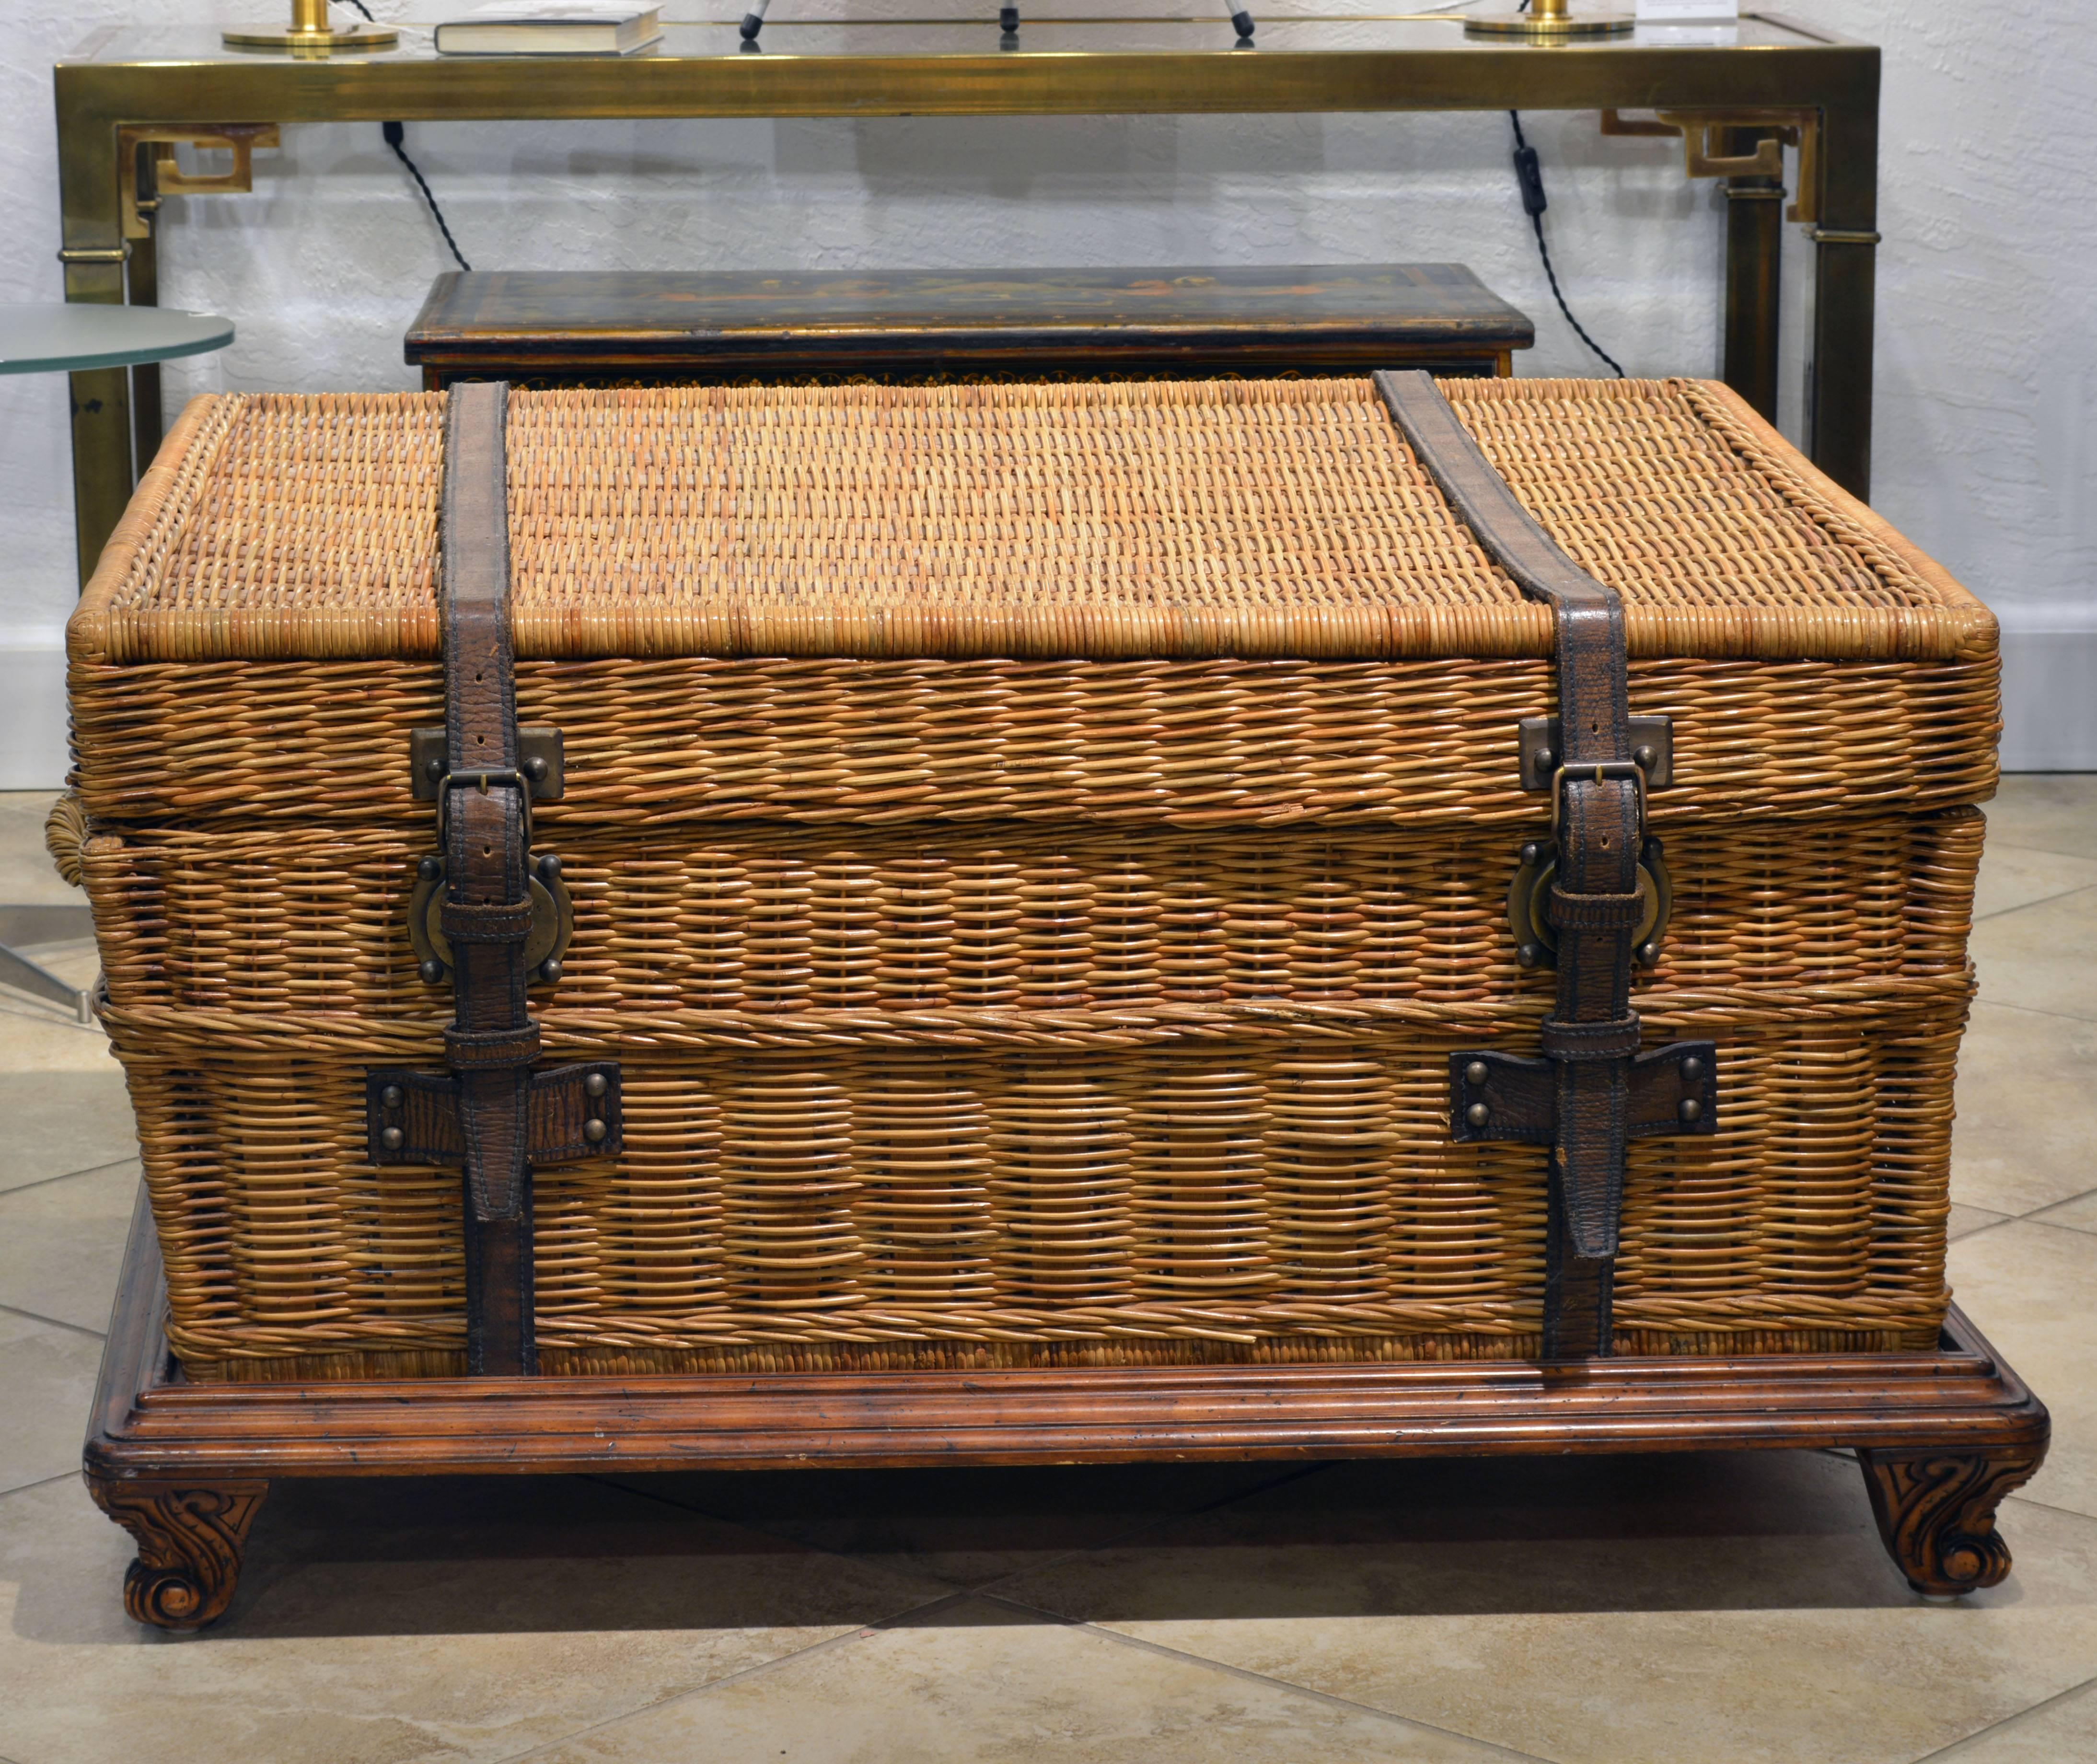 The worldly ambiance of the colonial times comes through in this great design by Ralph Lauren. The woven wicker trunk is raised on a low wooden chinoiserie style base to further accent the exotic reference.